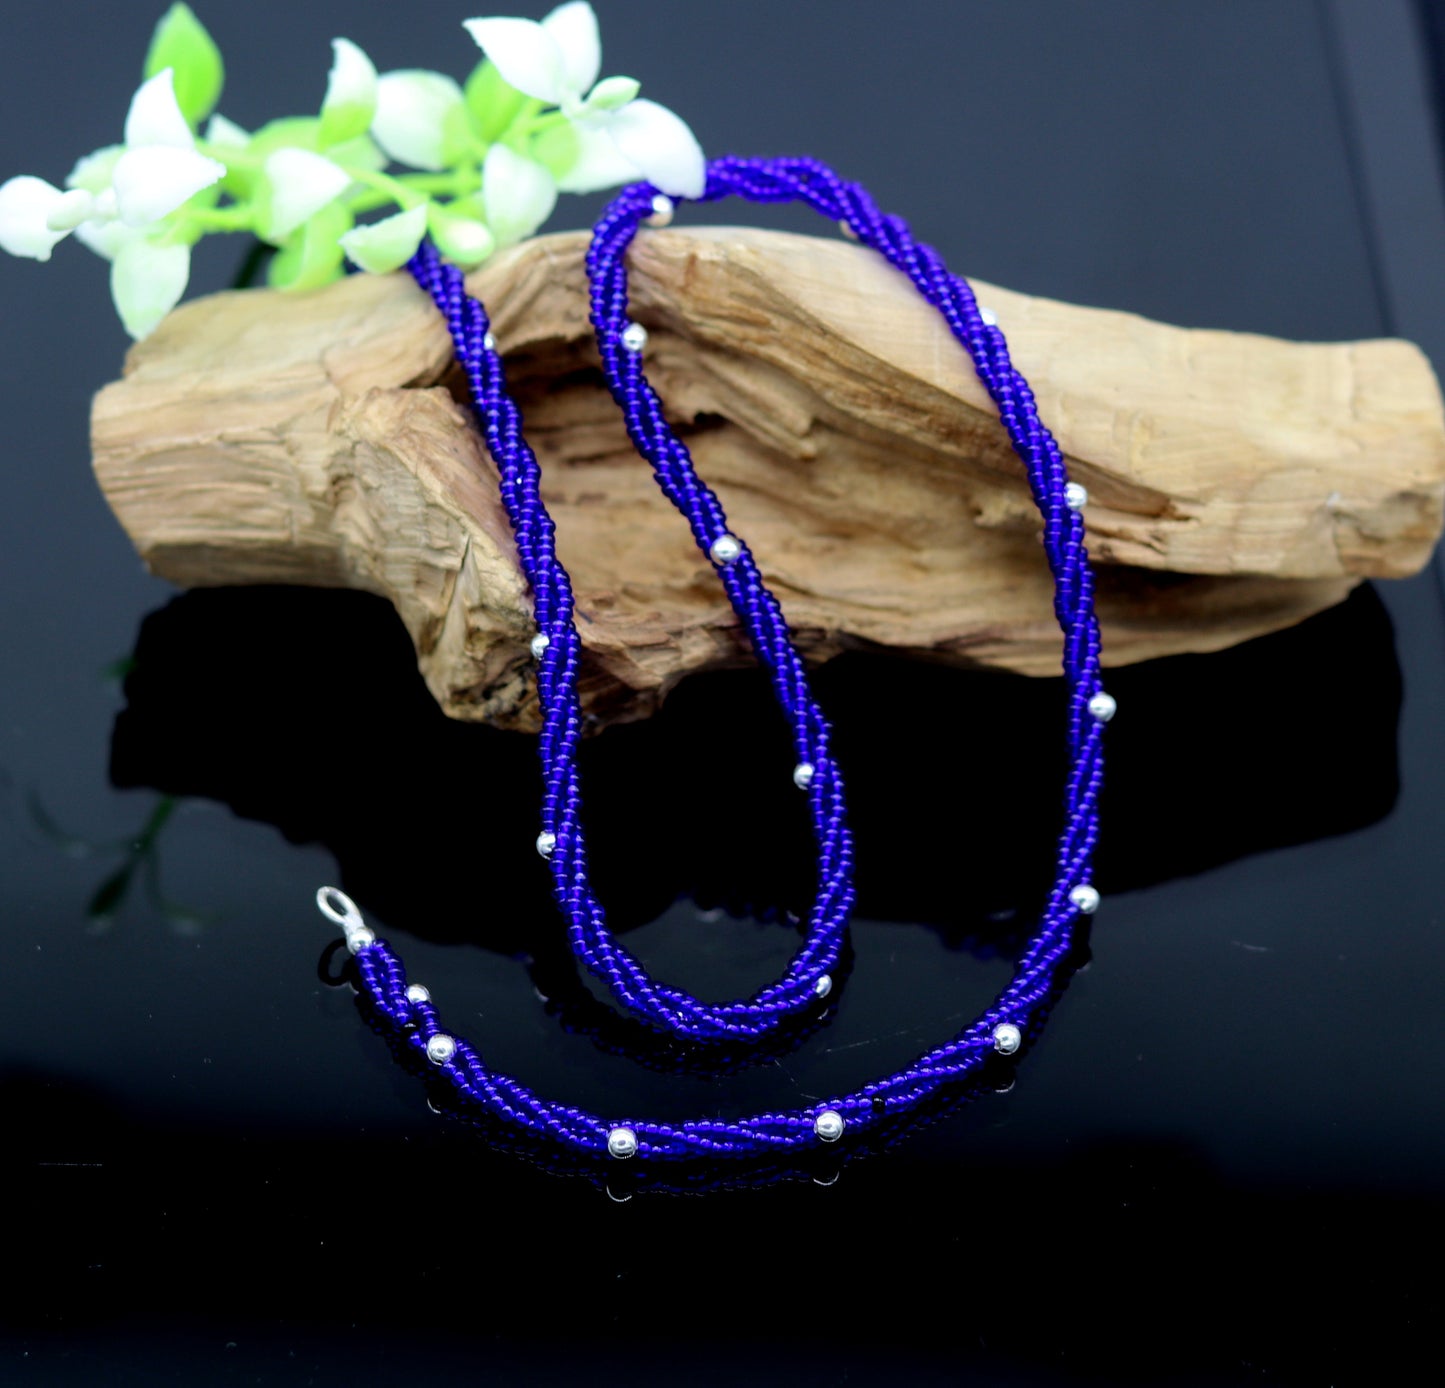 18.5" 925 sterling silver galaxy necklace triple strands blue semi precious stone beads with randomly placed silver beads necklace set137 - TRIBAL ORNAMENTS